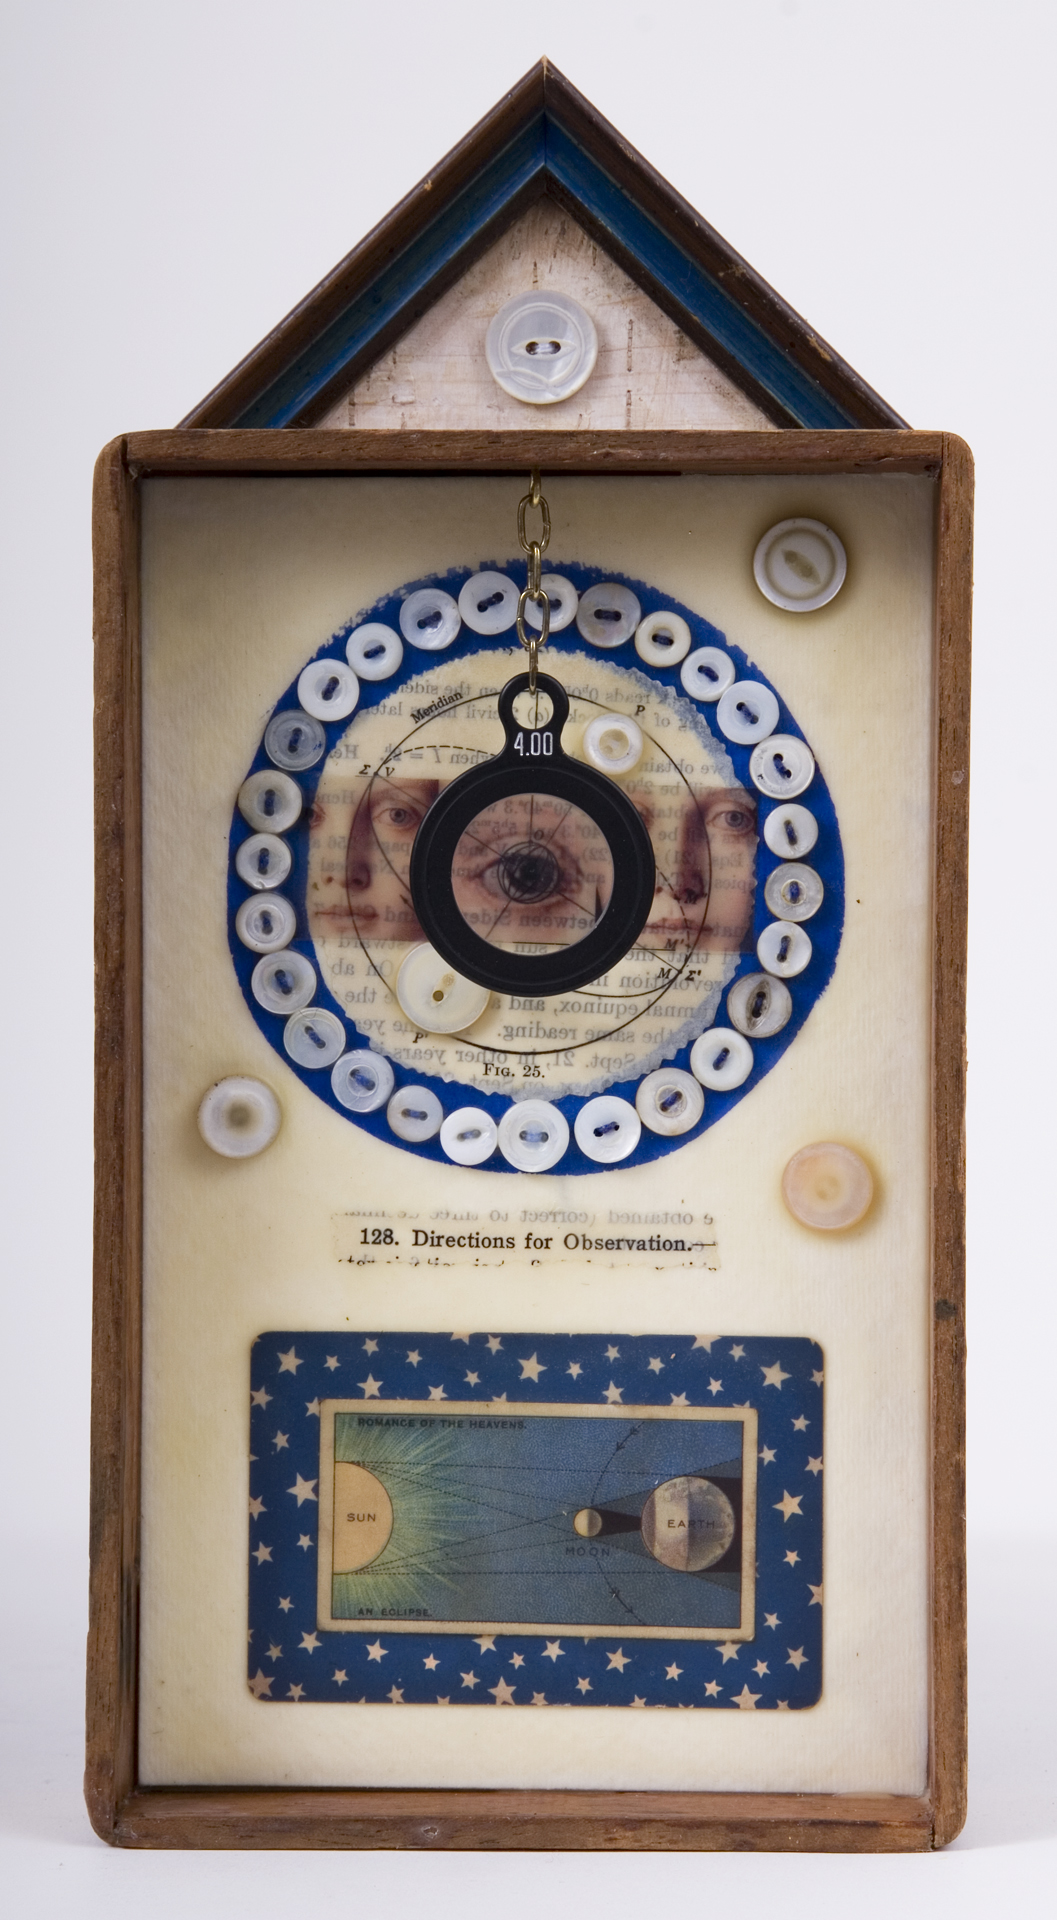     \"128. Directions for Observation\"
    mixed-media assemblage
    11 x 5.25 x 2.5
    2009
    SOLD
    Cigar box, frame sample, birch bark, mother of pearl buttons, fortune & tobac cards, transparency, optical lens, ink, wax, astronomy text on watercolor paper